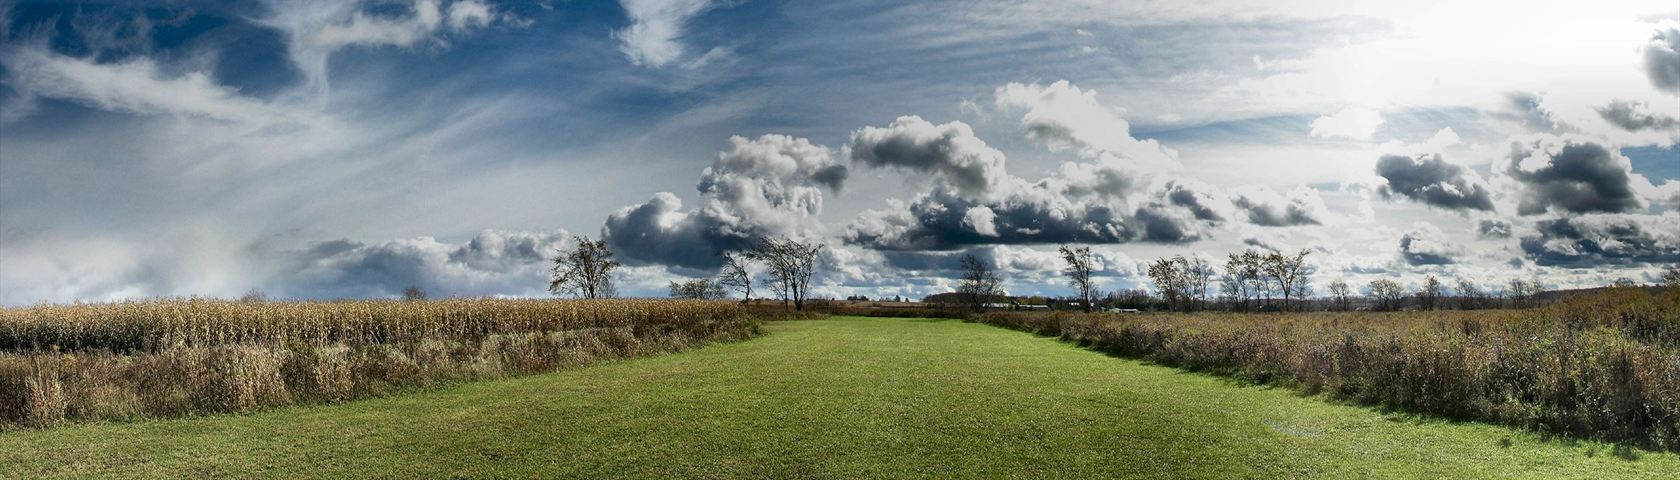 Panorama of a Field